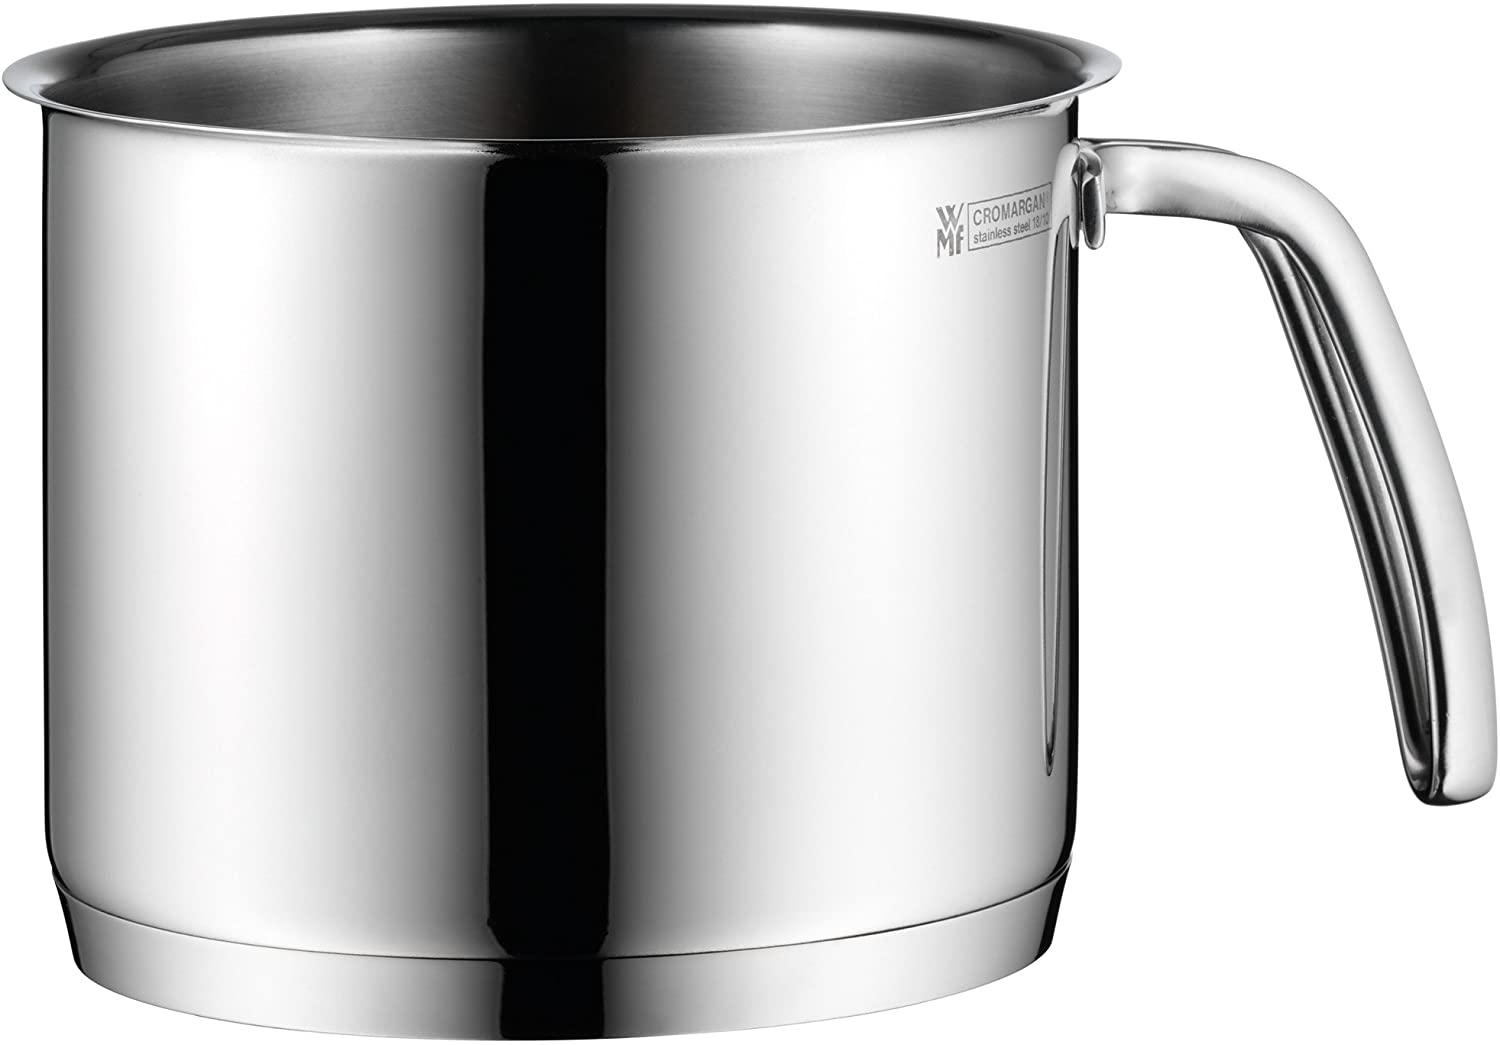 WMF Provence Plus Milk Pan without Lid, 14 cm, Induction Cooking Pot 1.7 L, Polished Cromargan Stainless Steel, Uncoated, Oven-Safe